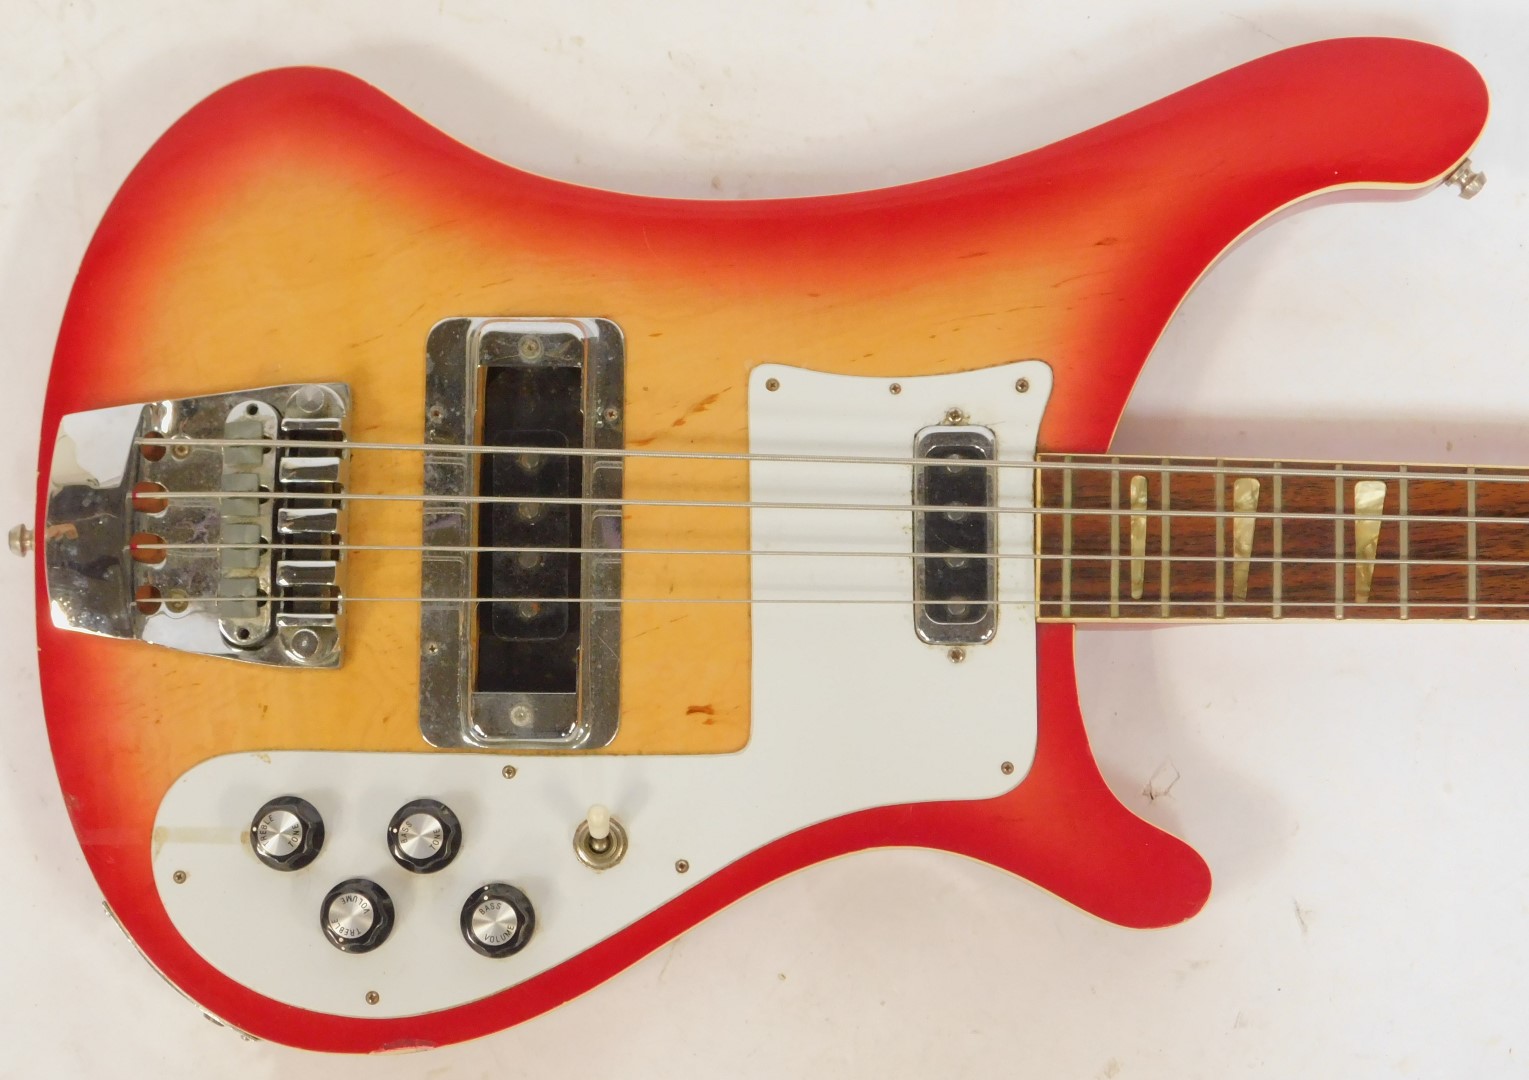 A Rirkenbacker electric bass guitar, the body in red, with the front panel fading to a yellow, the - Image 2 of 7